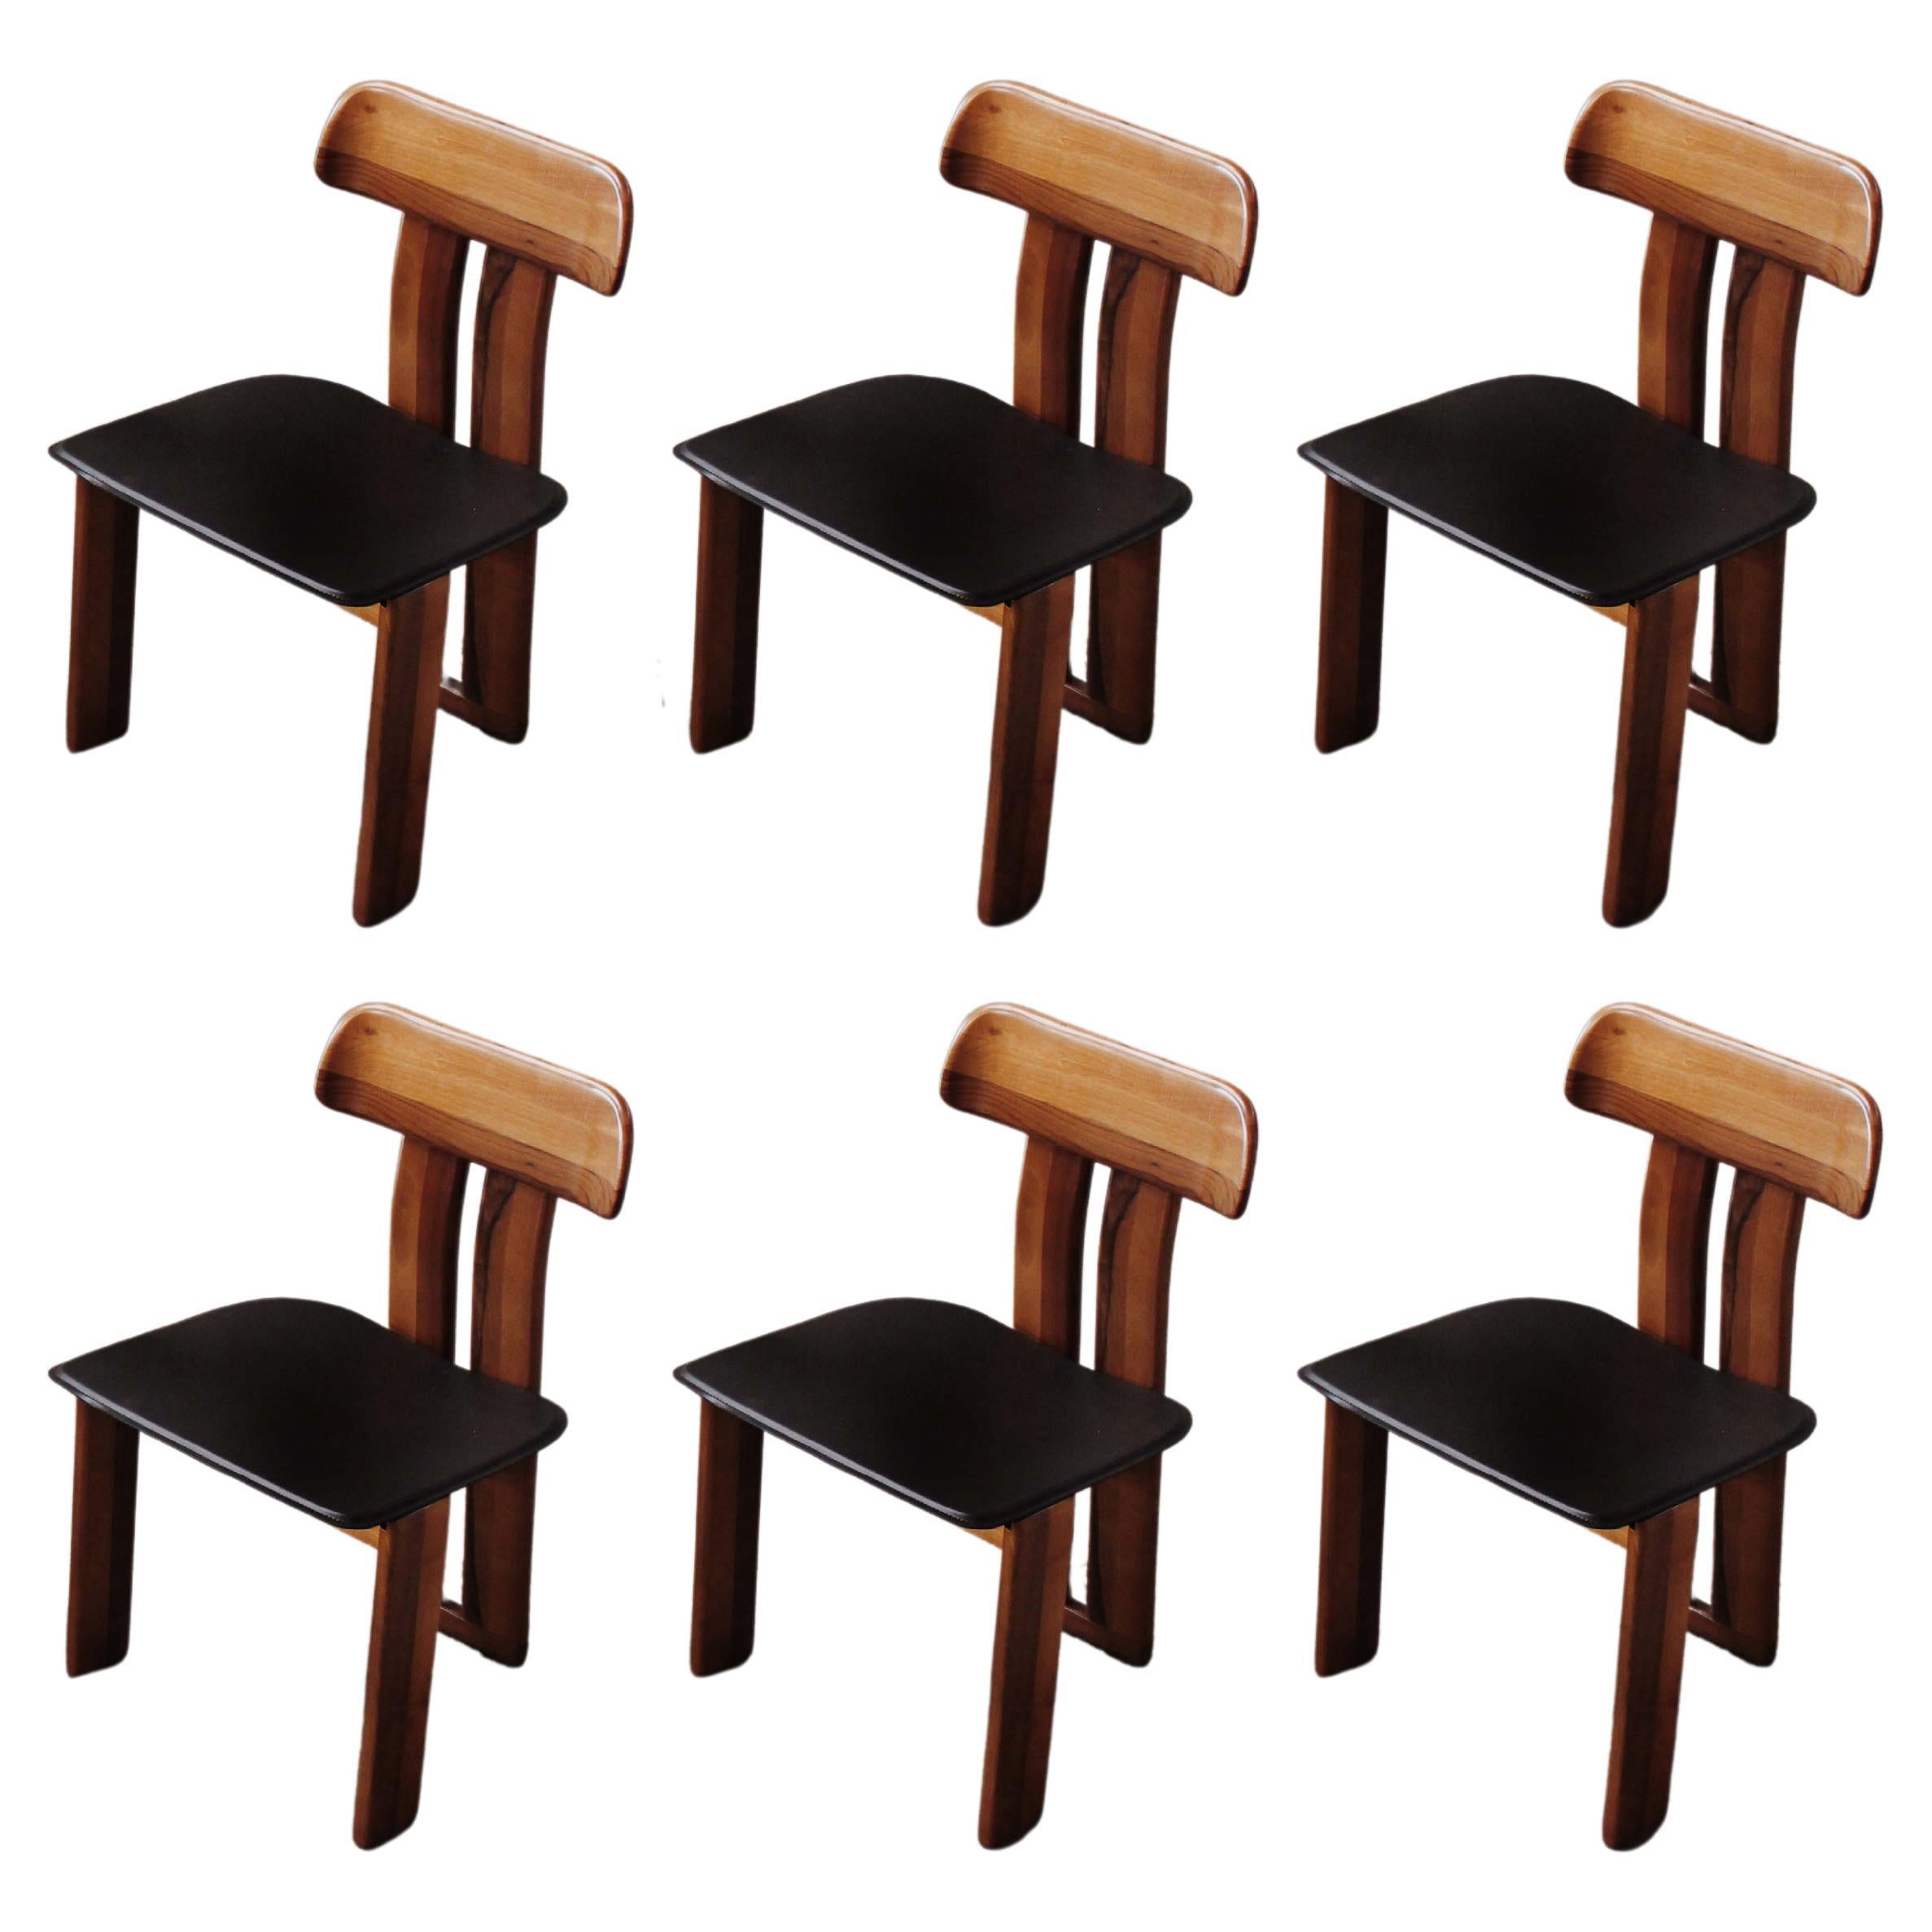 Mario Marenco "Sapporo" Chairs for Mobil Girgi, 1970, Set of 6 For Sale